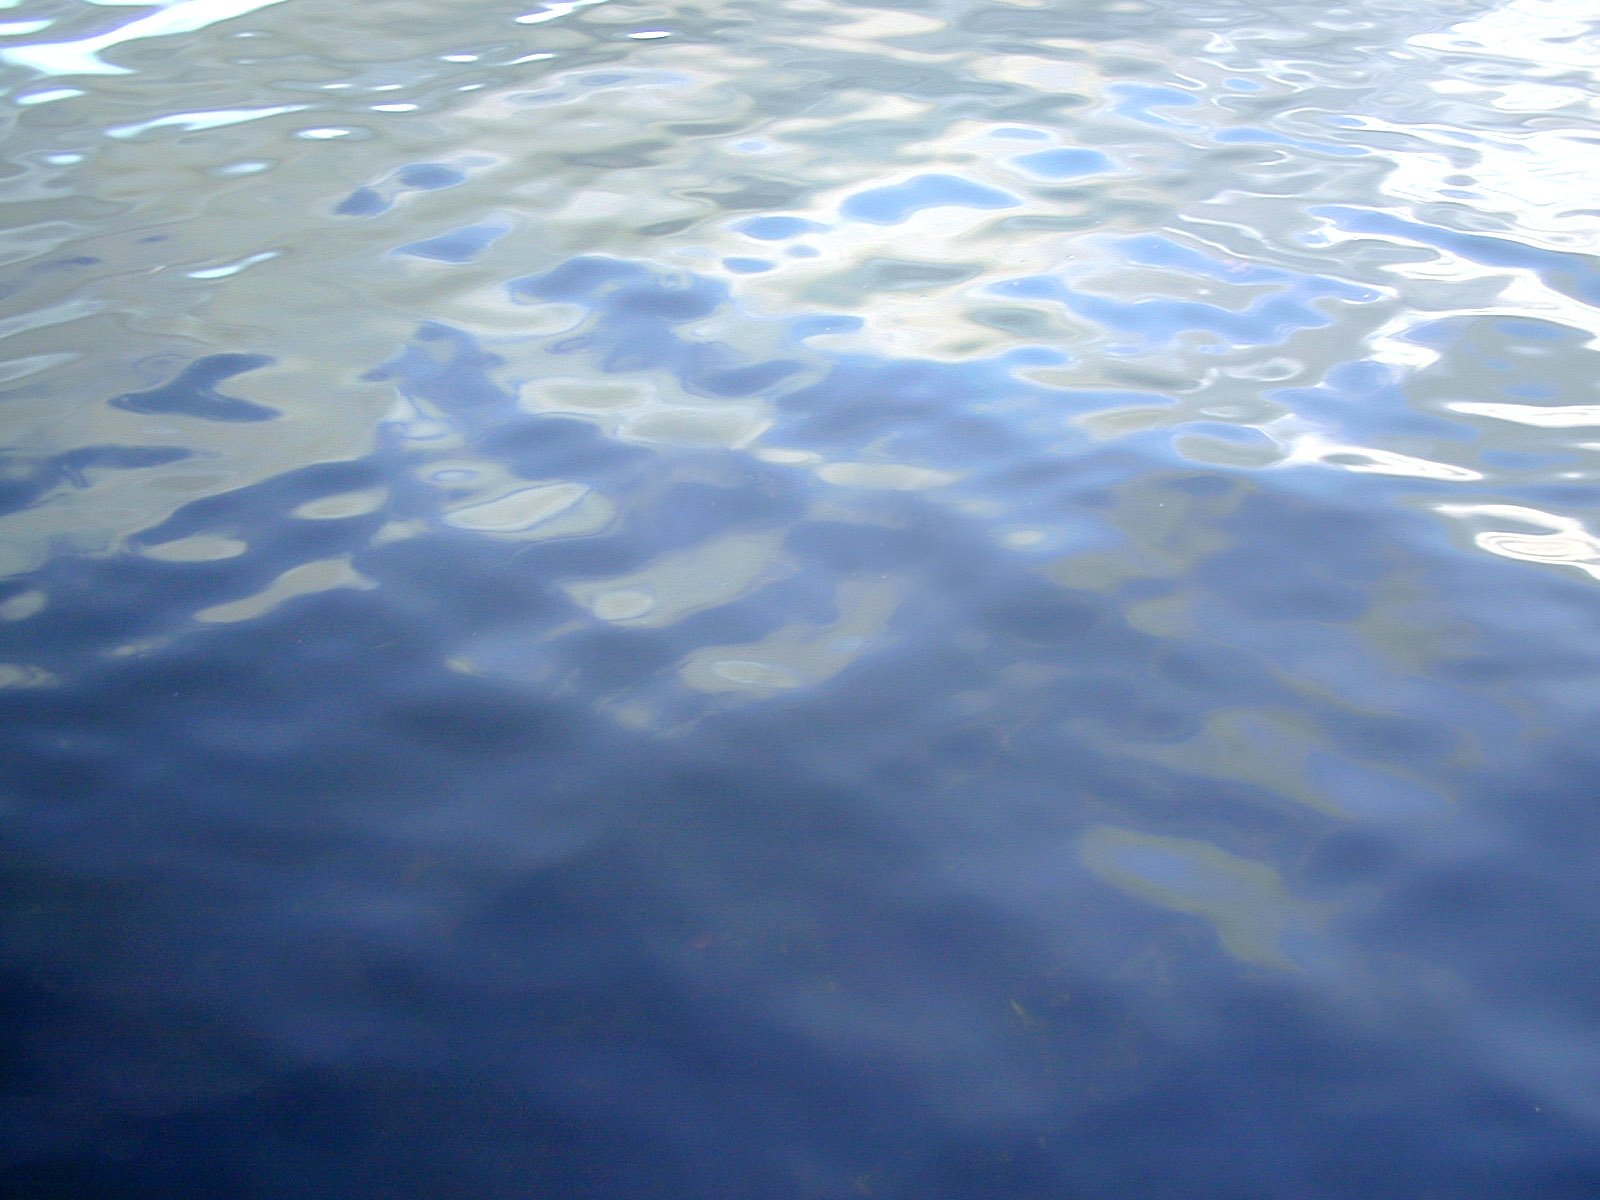 the surface of blue water reflecting small ripples